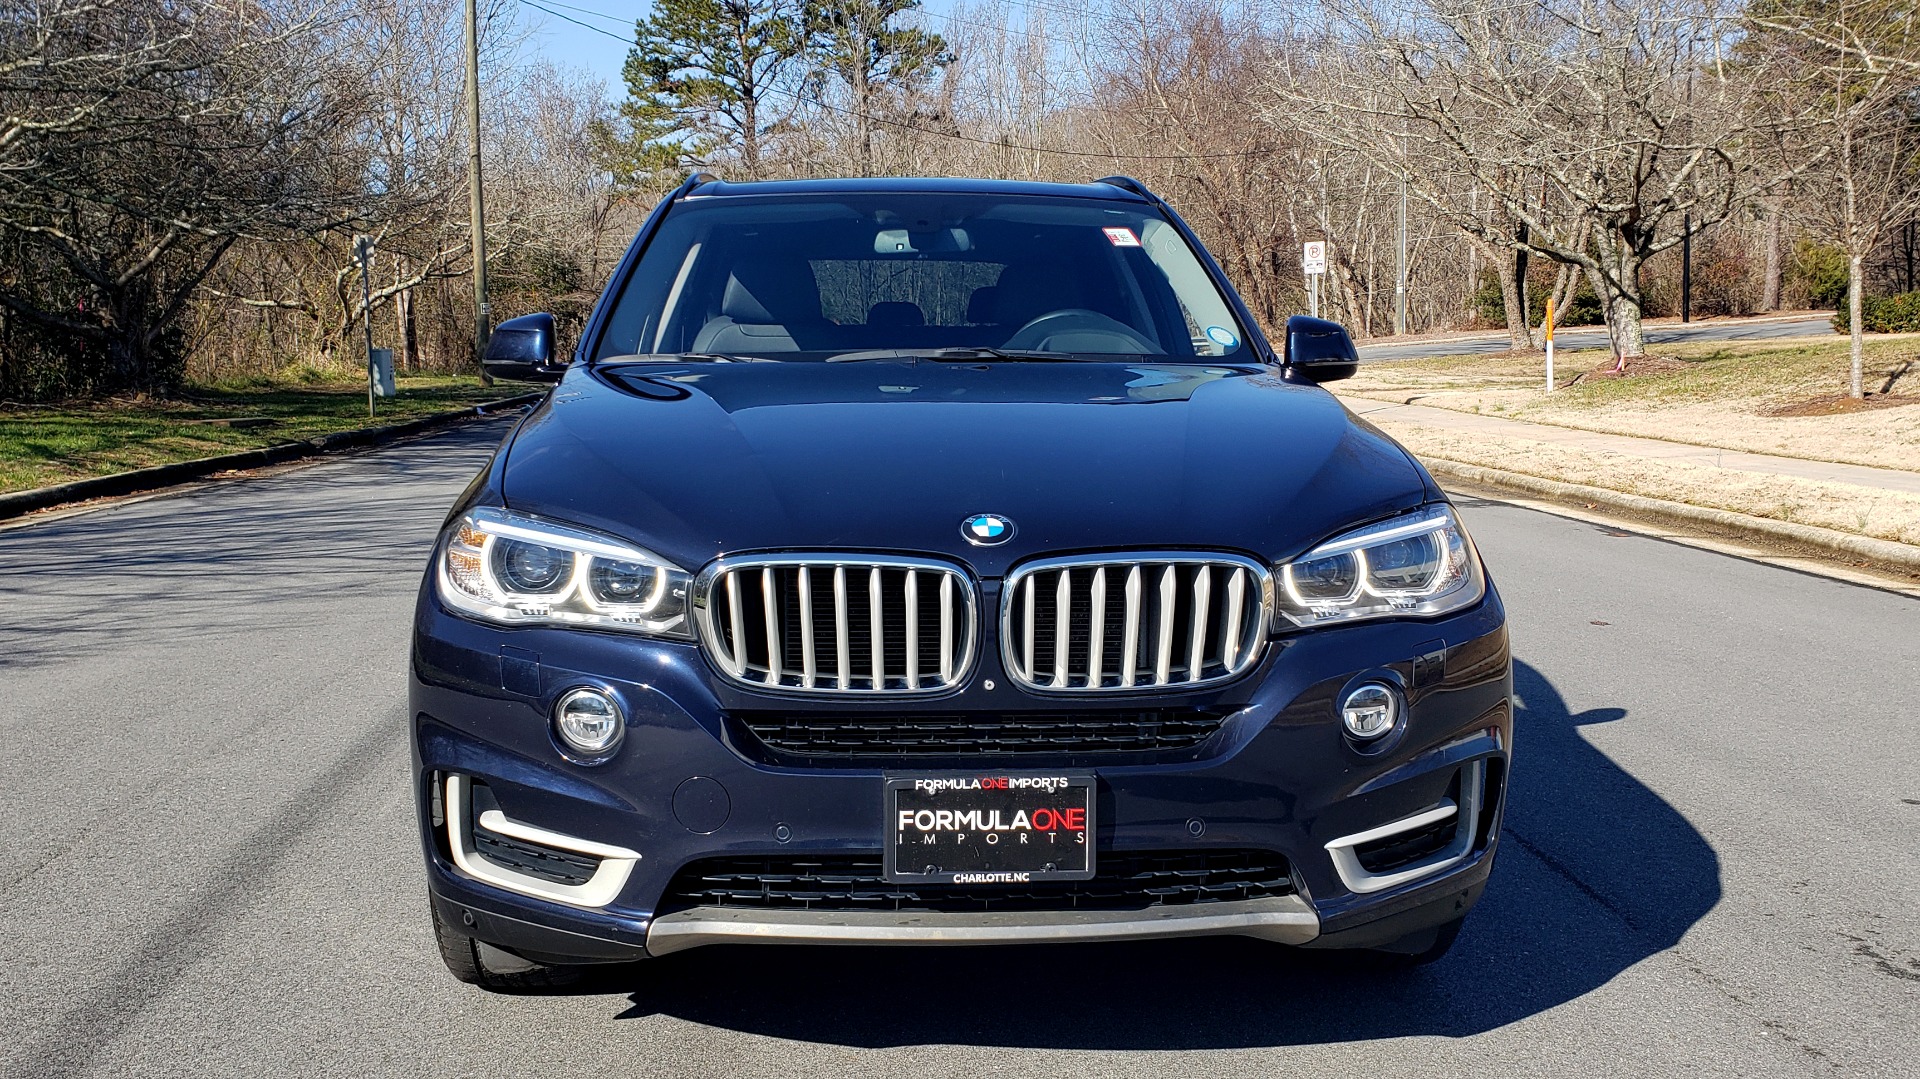 Used 2015 BMW X5 XDRIVE35I PREMIUM / NAV / XLINE / CLD WTHR / DRVR ASST / REARVIEW for sale Sold at Formula Imports in Charlotte NC 28227 25